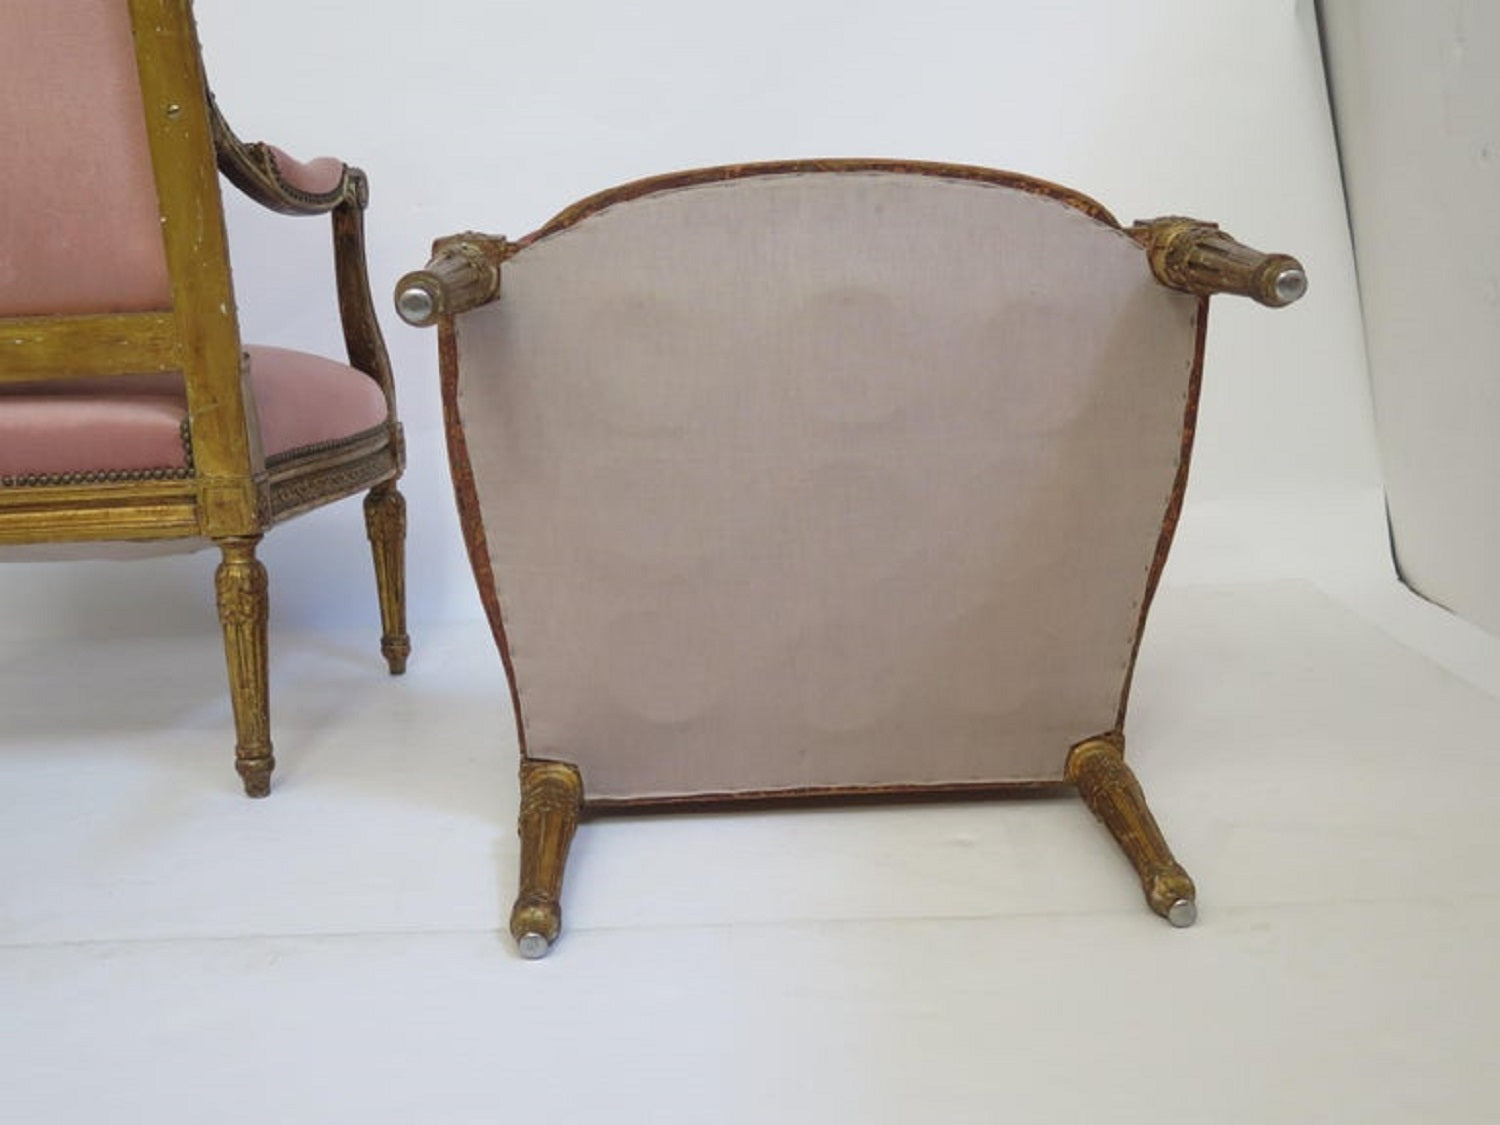 A Pair of Louis XVI-Style Giltwood Fauteuils/Armchairs